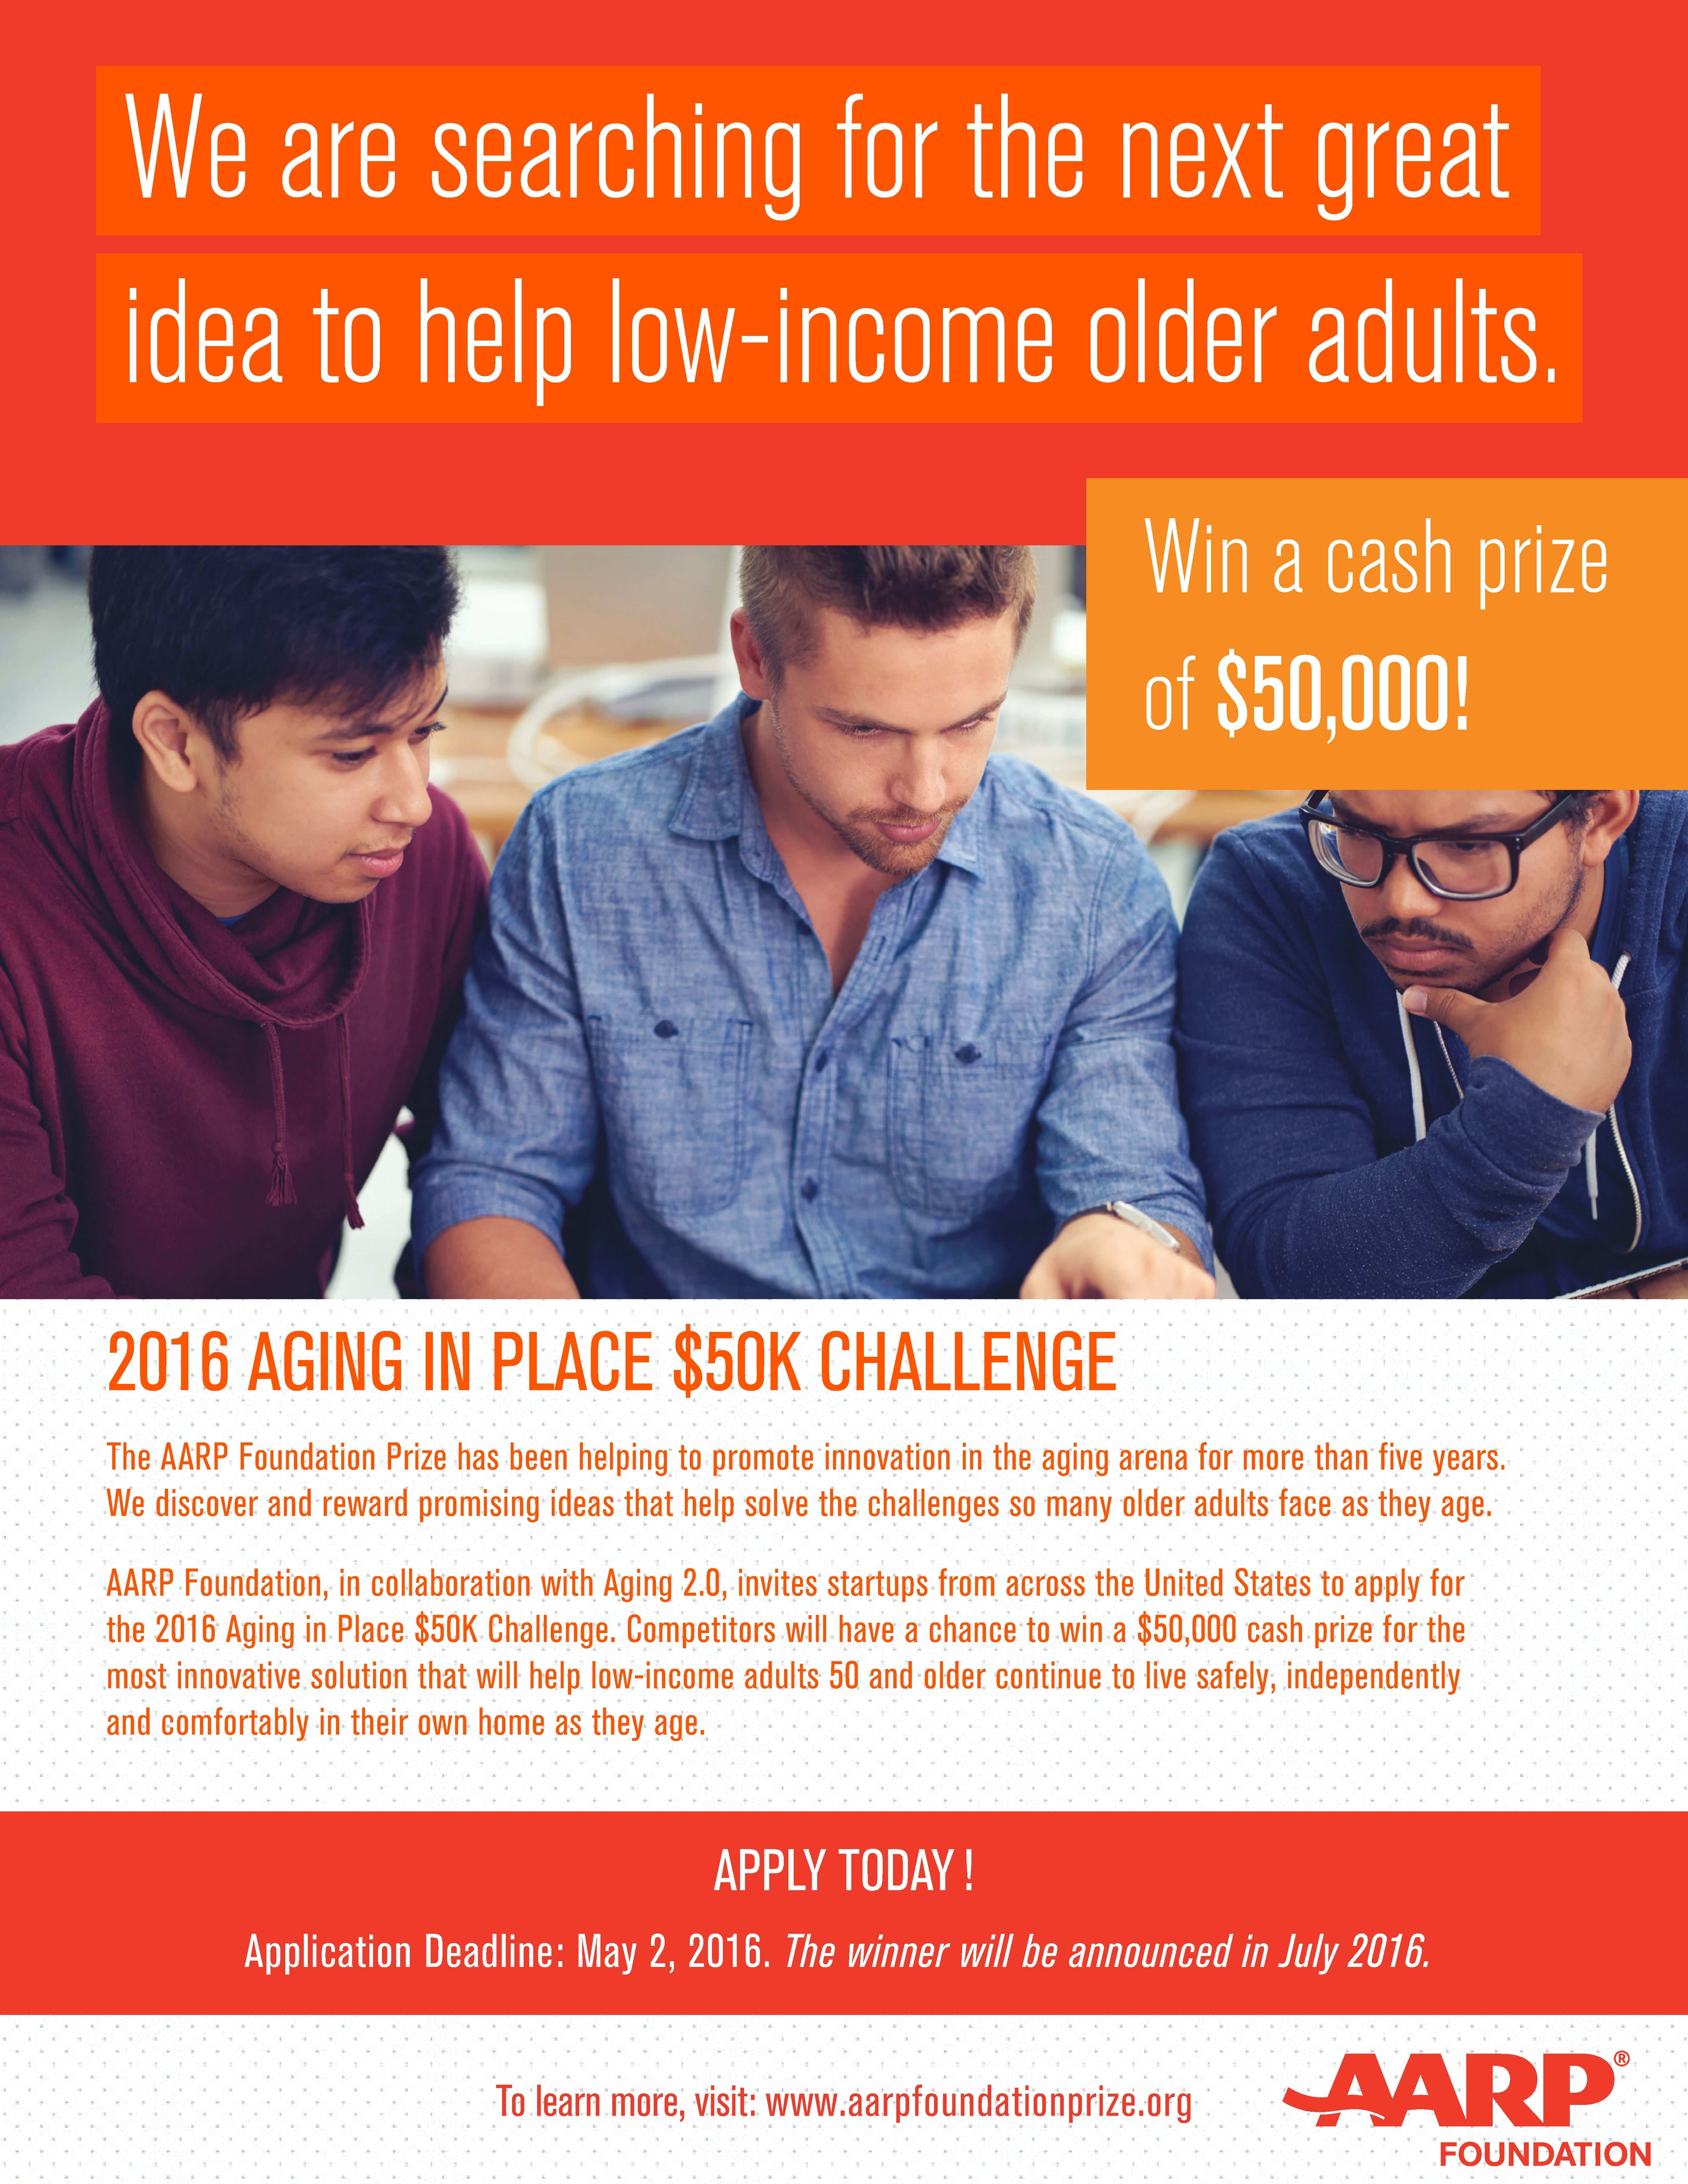 Flyer about the AARP Foundation 2016 $50K Challenge